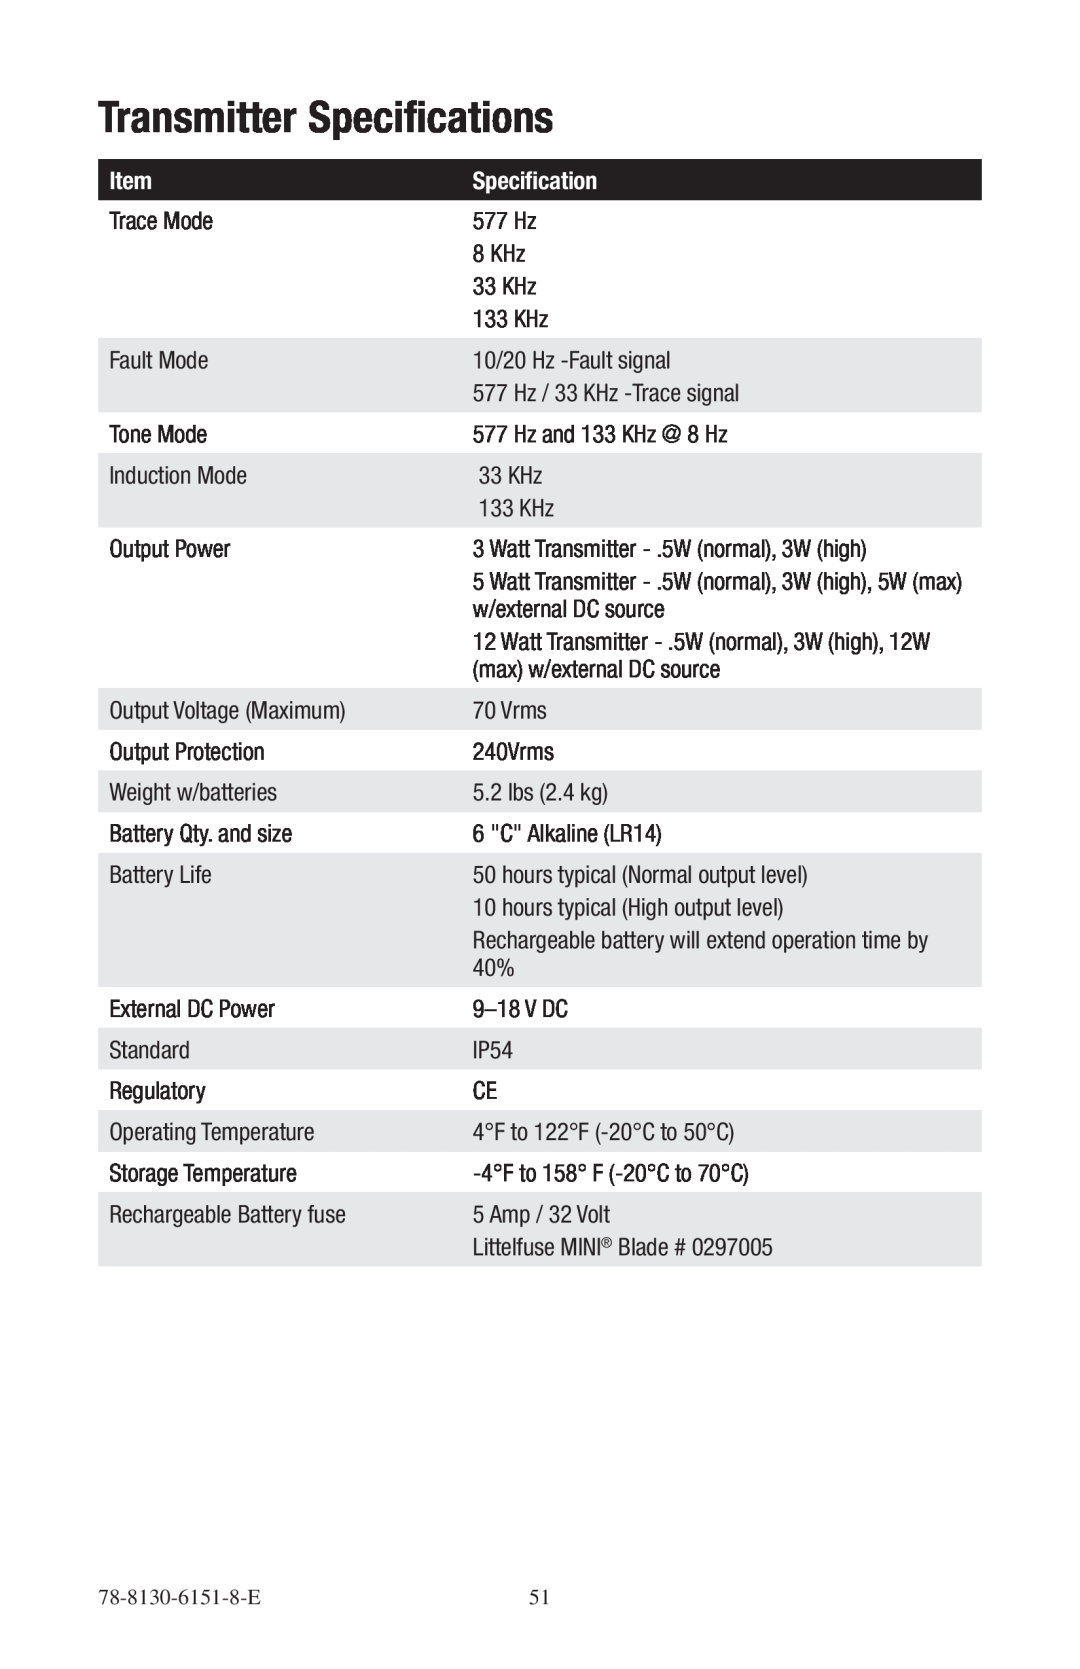 3M 2273ME-iD, 2250ME-iD manual Transmitter Specifications 